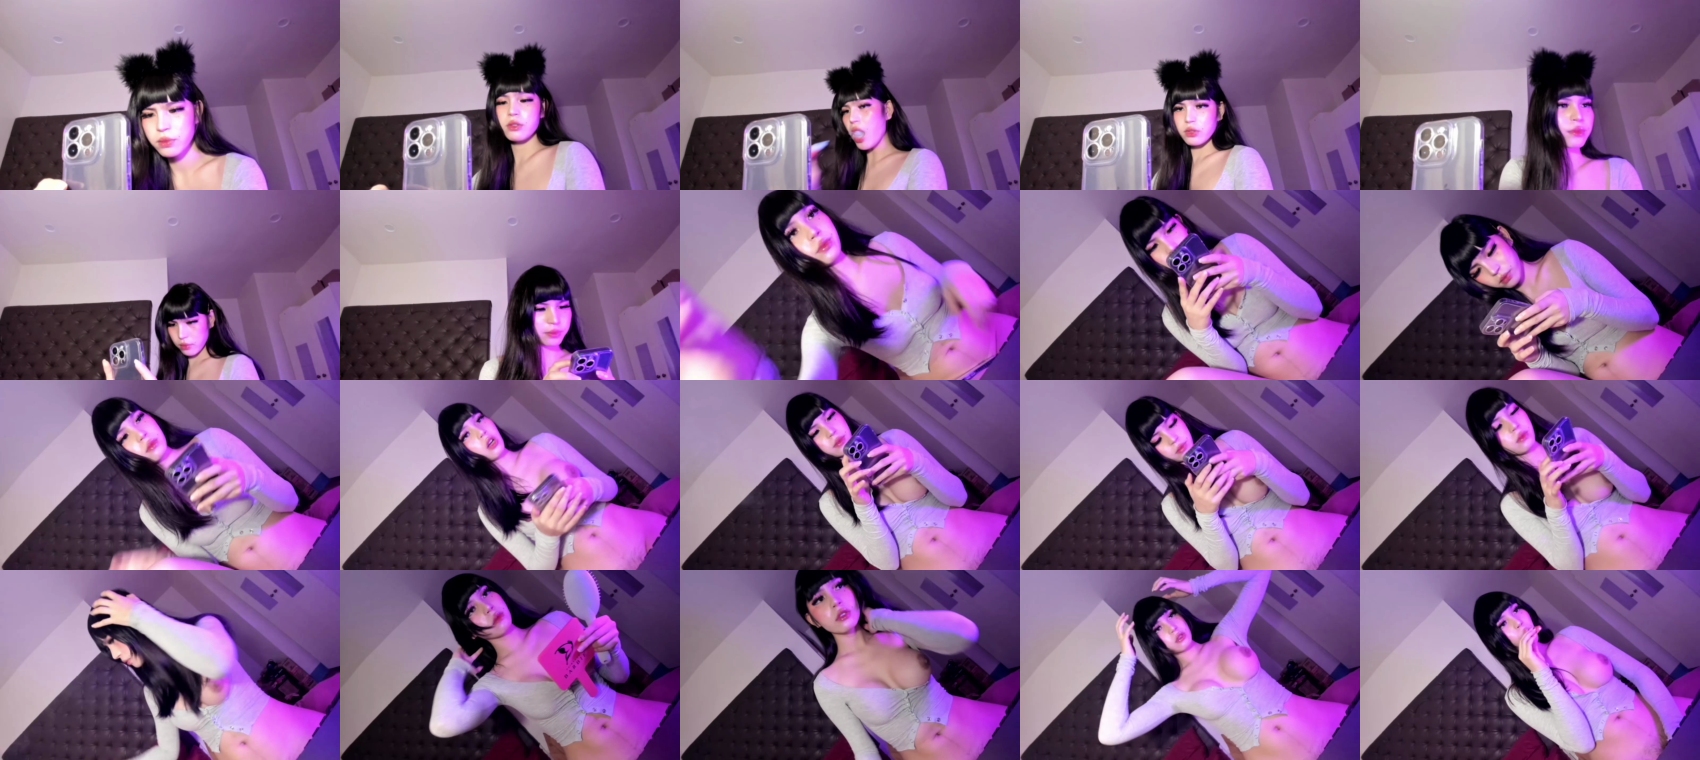 _alluring_christie_ Topless CAM SHOW @ Chaturbate 30-10-2022